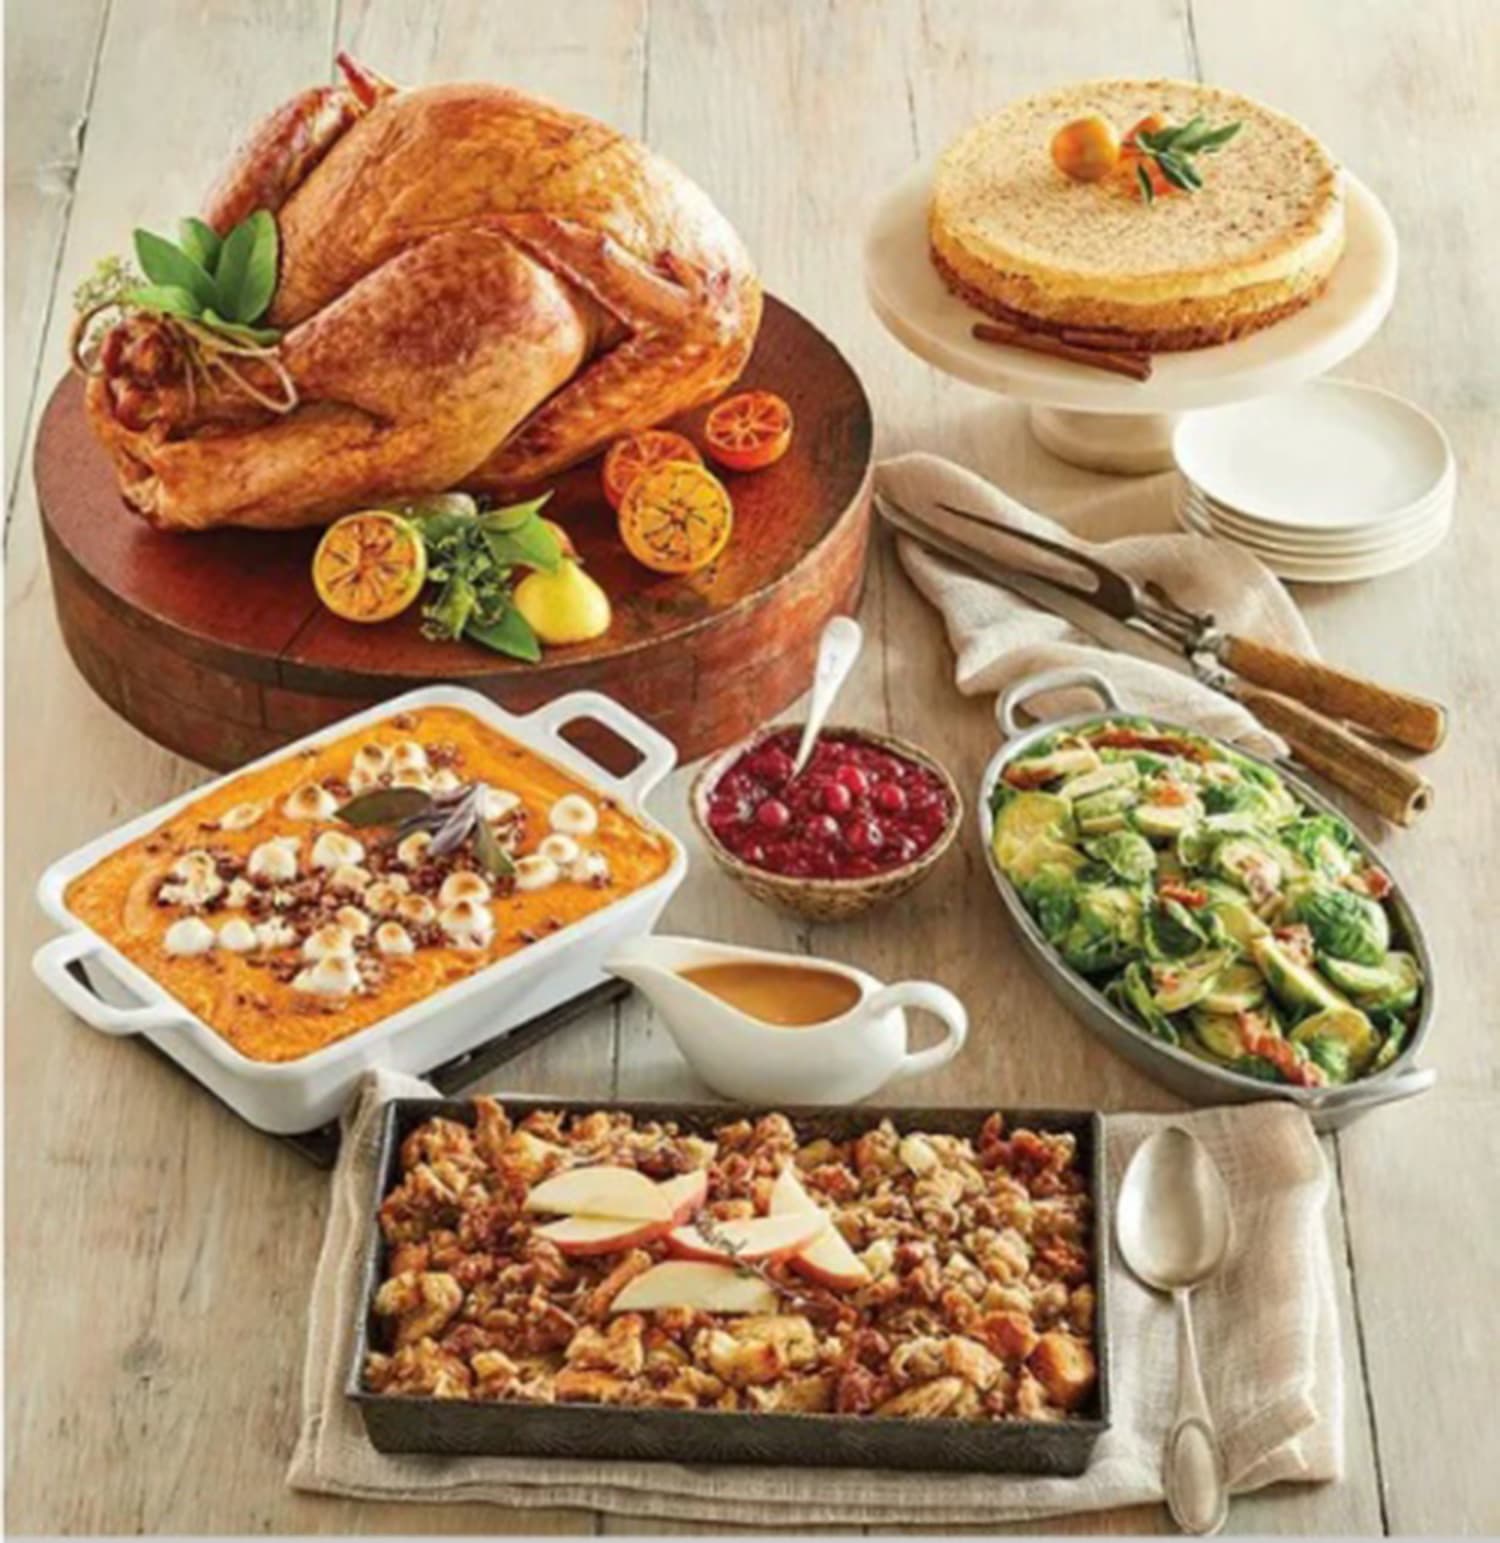 Prepared Thanksgiving Dinners You Can Order Online Or Pick Up